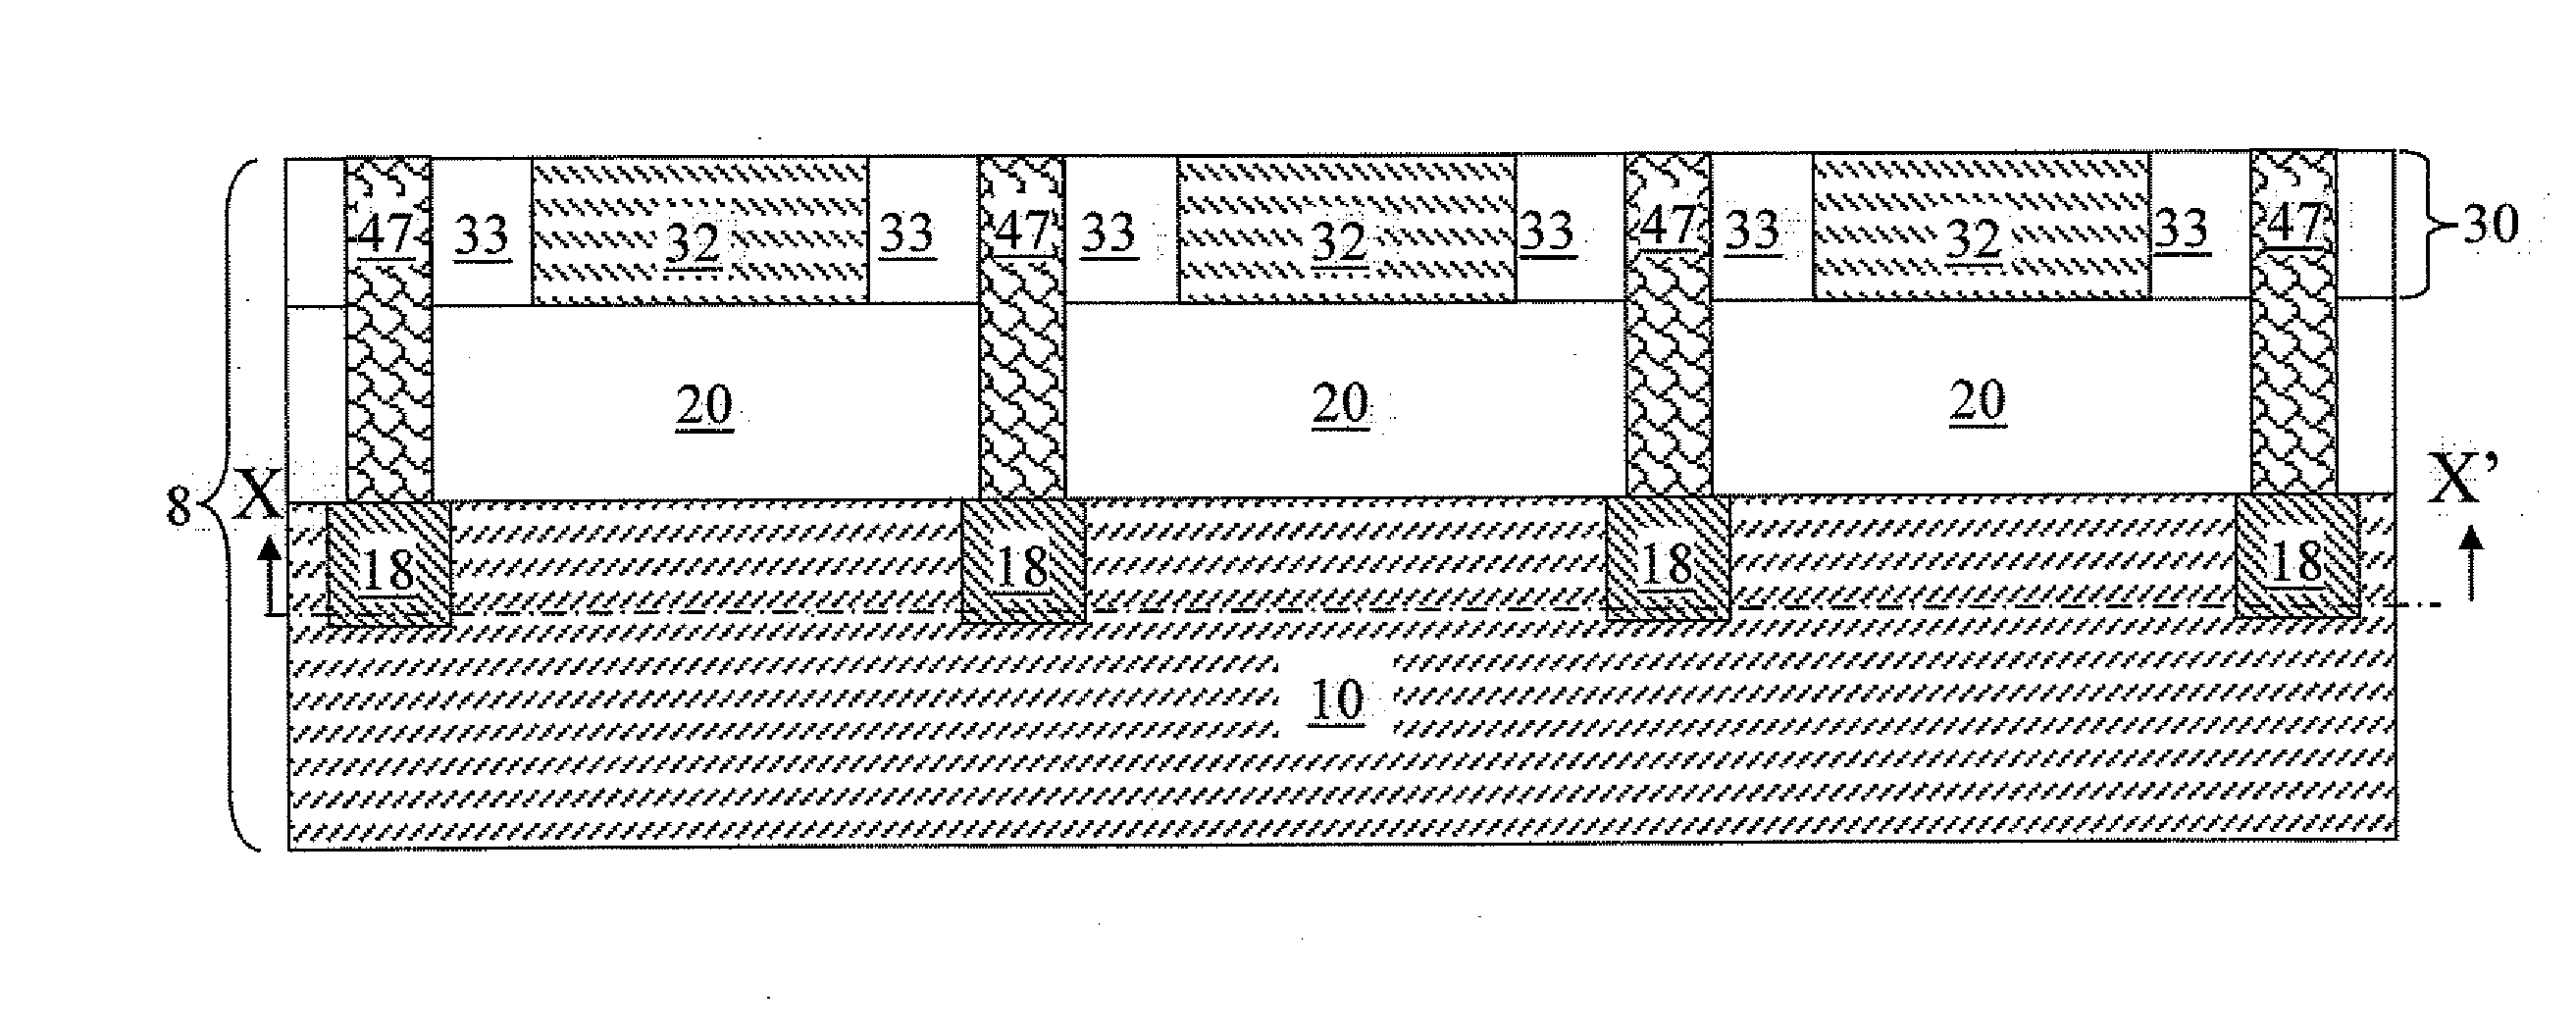 Soi radio frequency switch with enhanced signal fidelity and electrical isolation